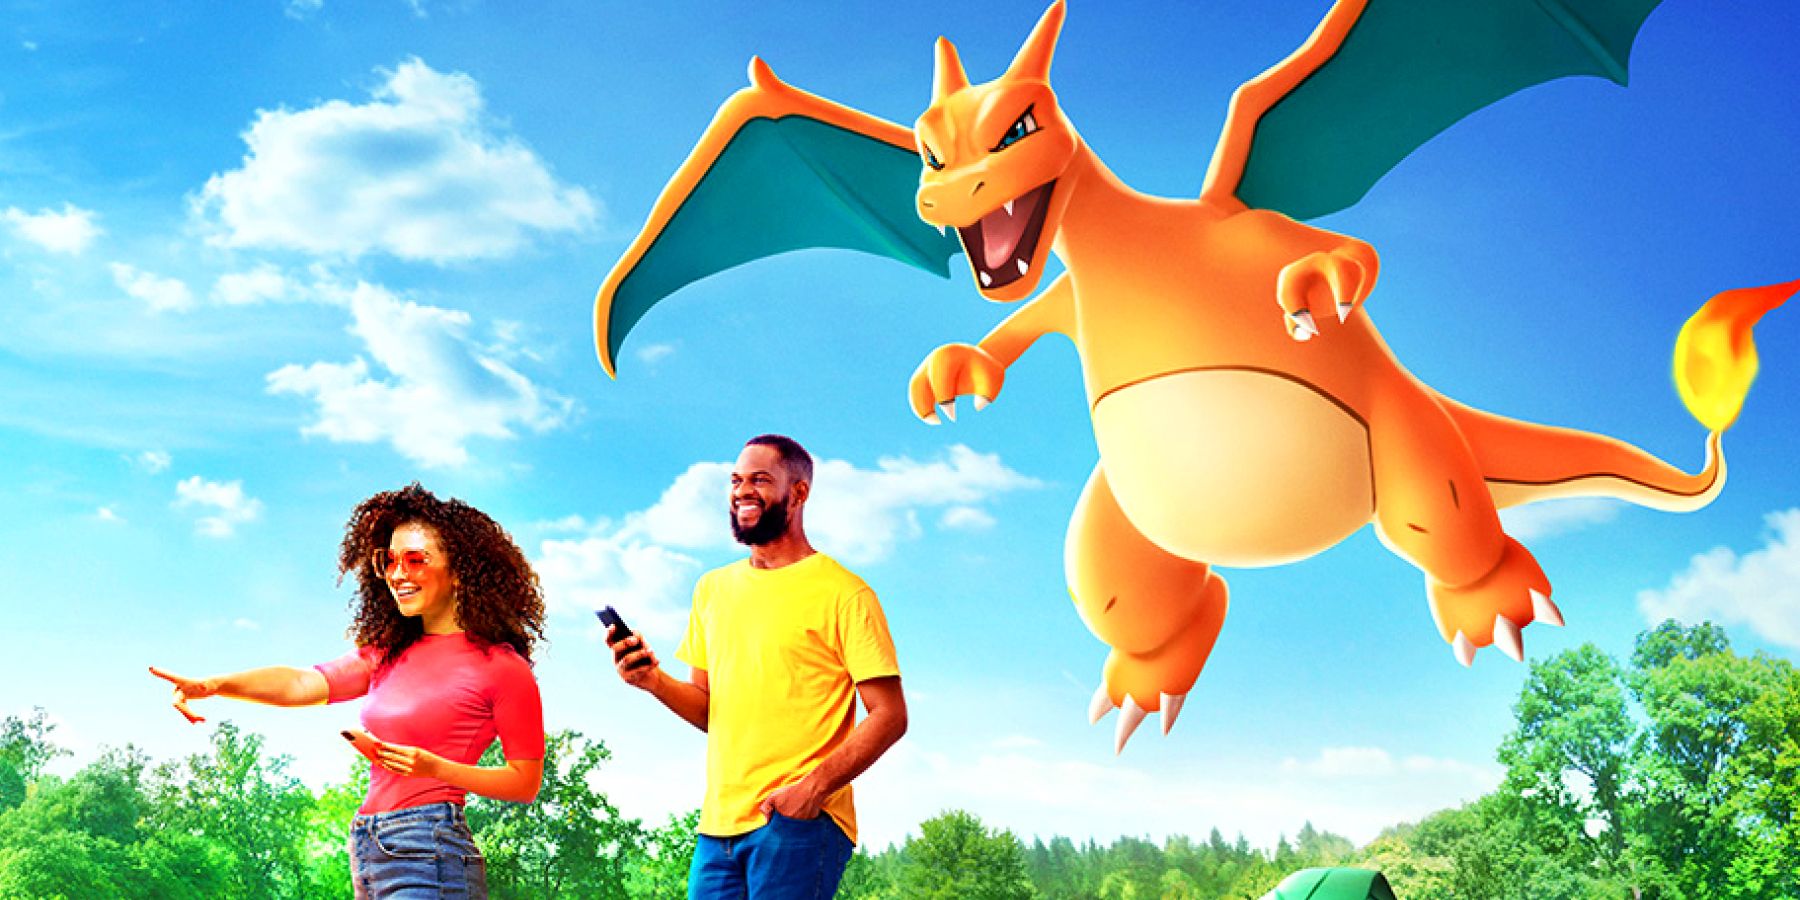 Charizard flying behind two people carrying their phones, playing Pokémon GO.